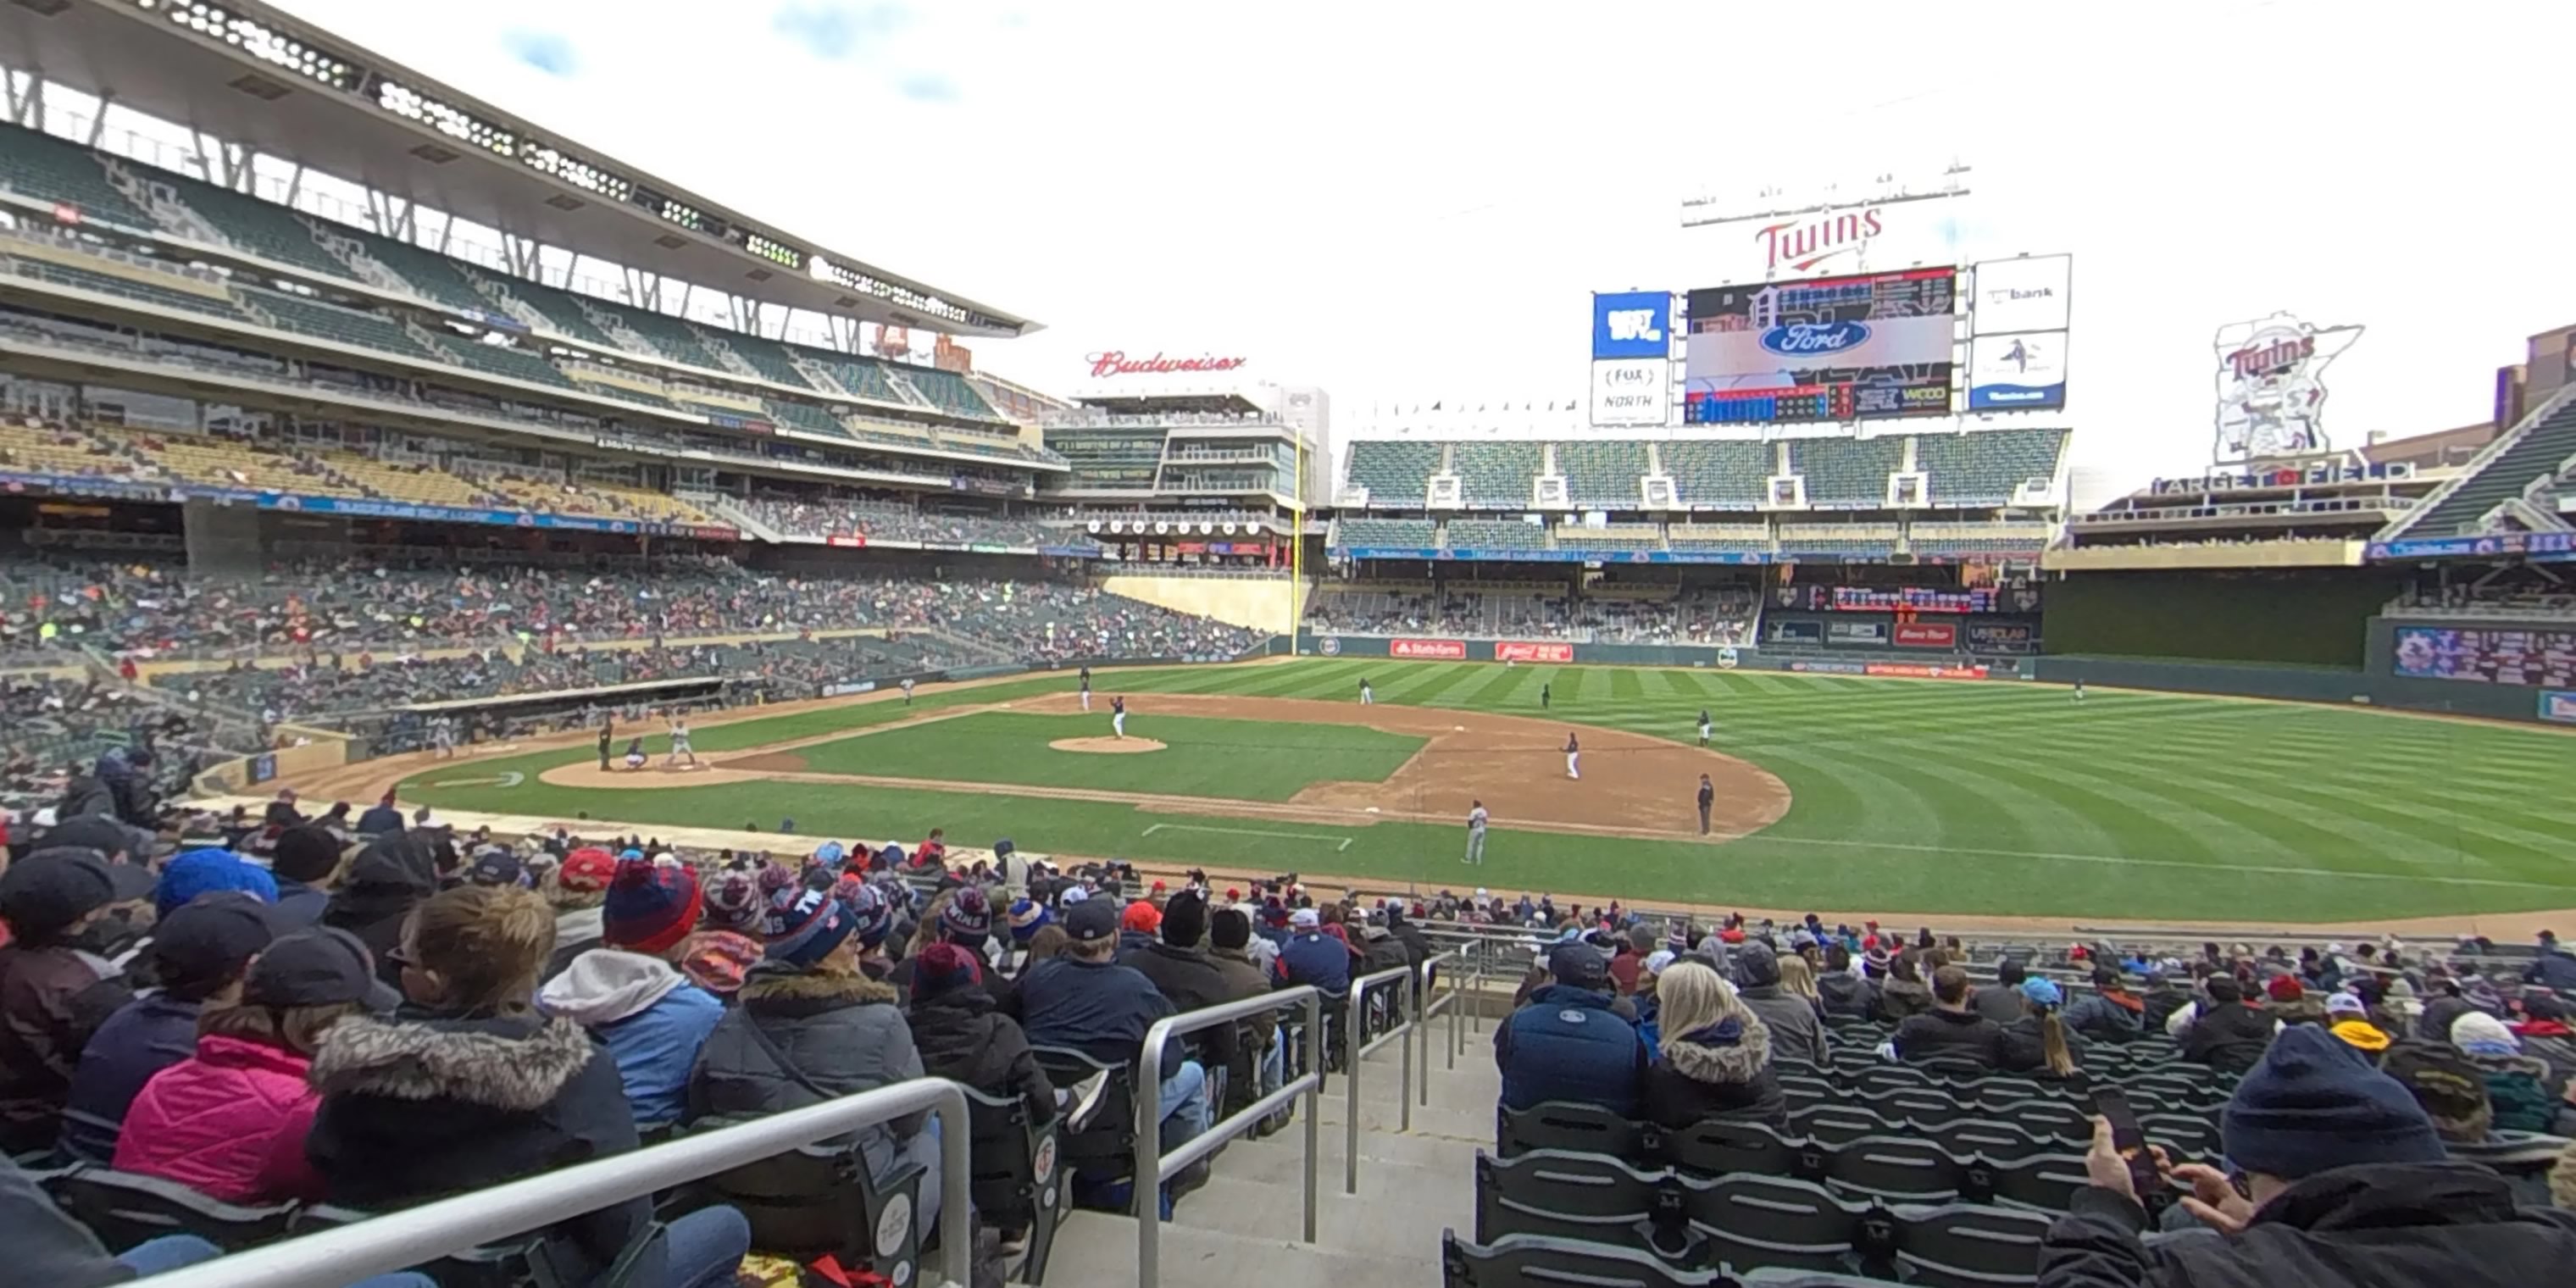 Section 107 at Target Field